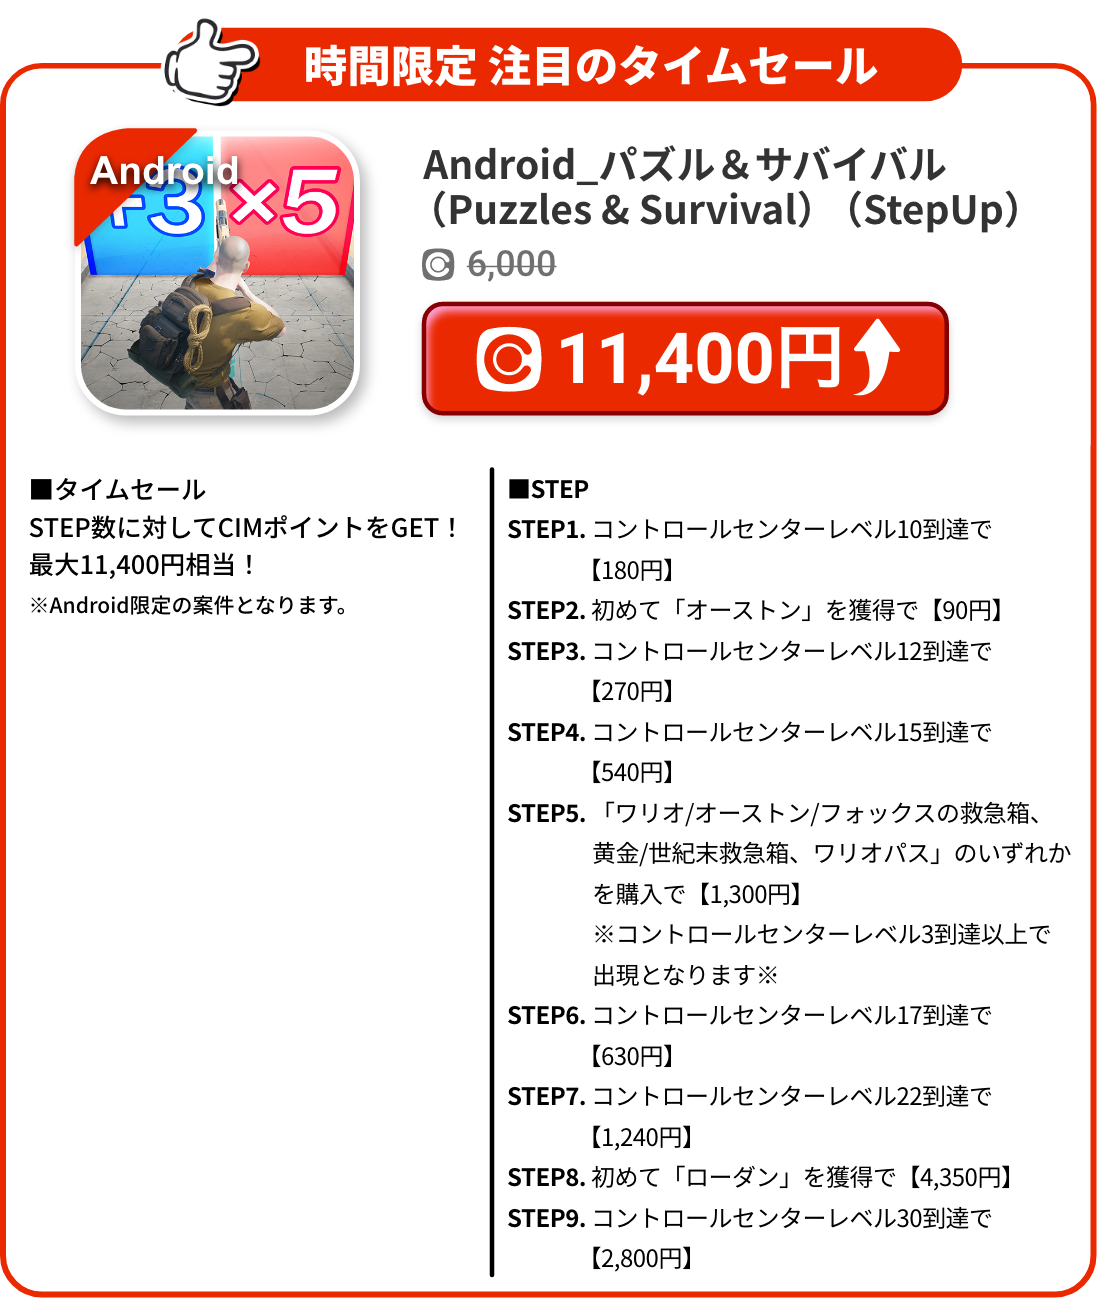 Android_パズル＆サバイバル（Puzzles & Survival）（StepUp）